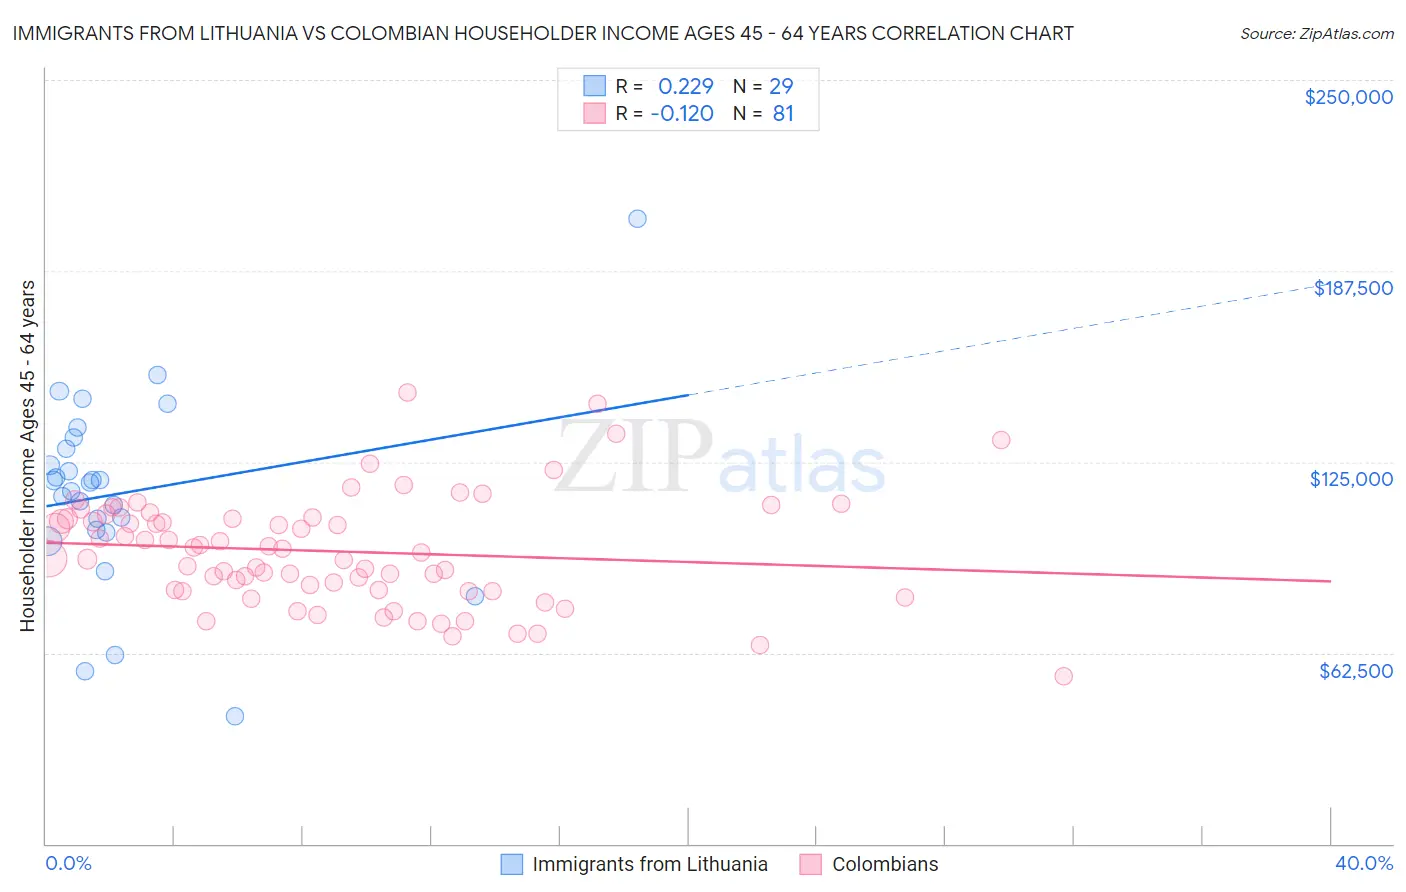 Immigrants from Lithuania vs Colombian Householder Income Ages 45 - 64 years